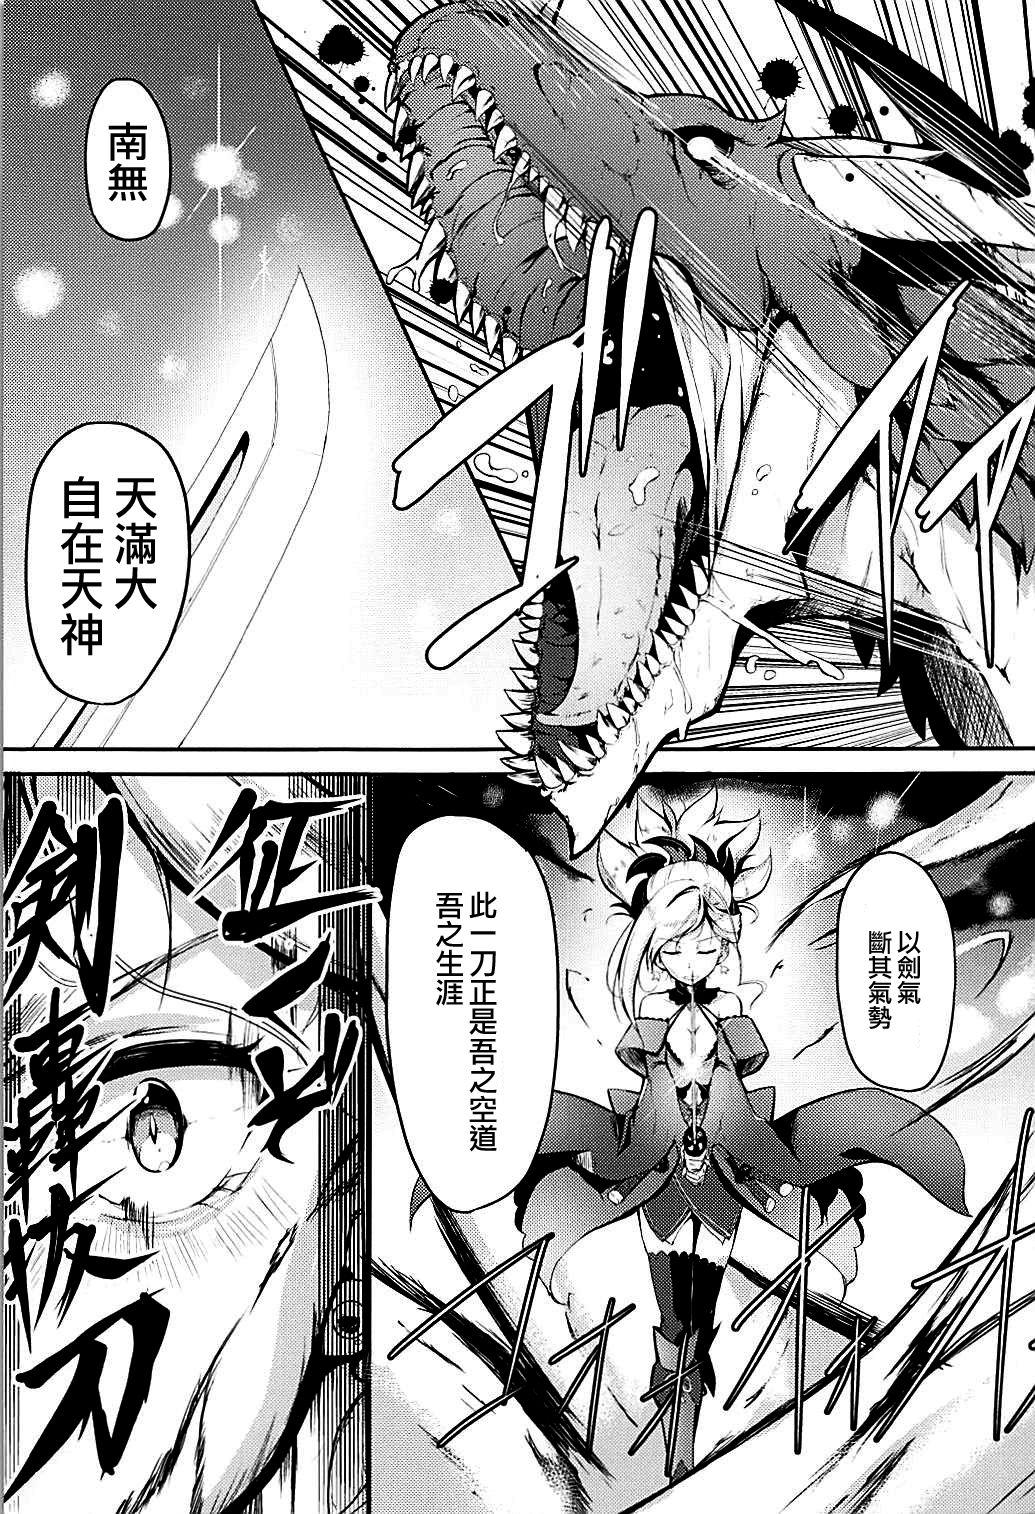 Stripping Nitou Ryouran - Fate grand order Humiliation - Page 2